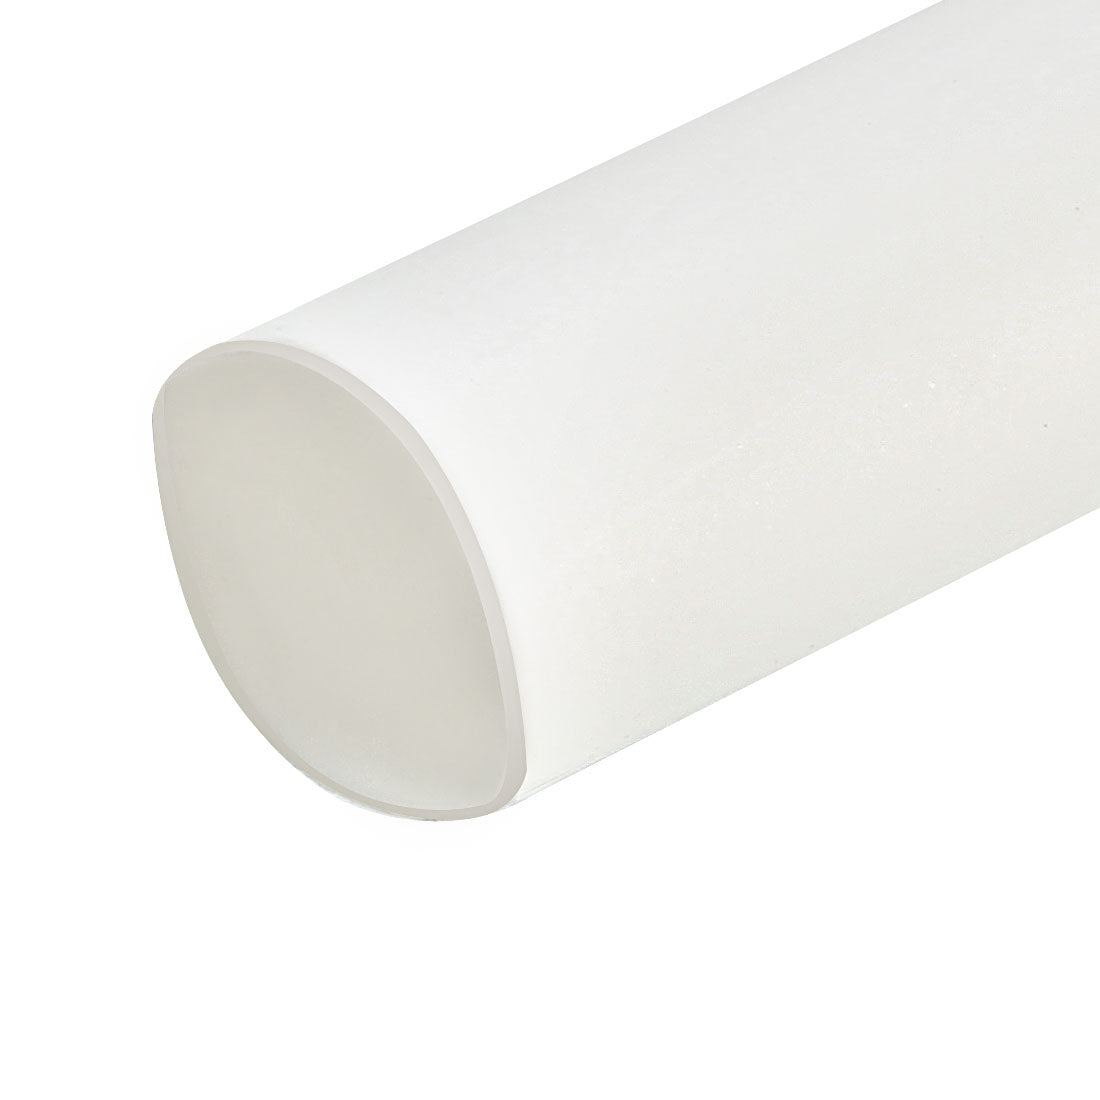 uxcell Uxcell Heat Shrink Tube 2:1 Electric Insulation Tube Wire Cable Tubing Sleeving Wrap White 3mm Diameter 1m Long